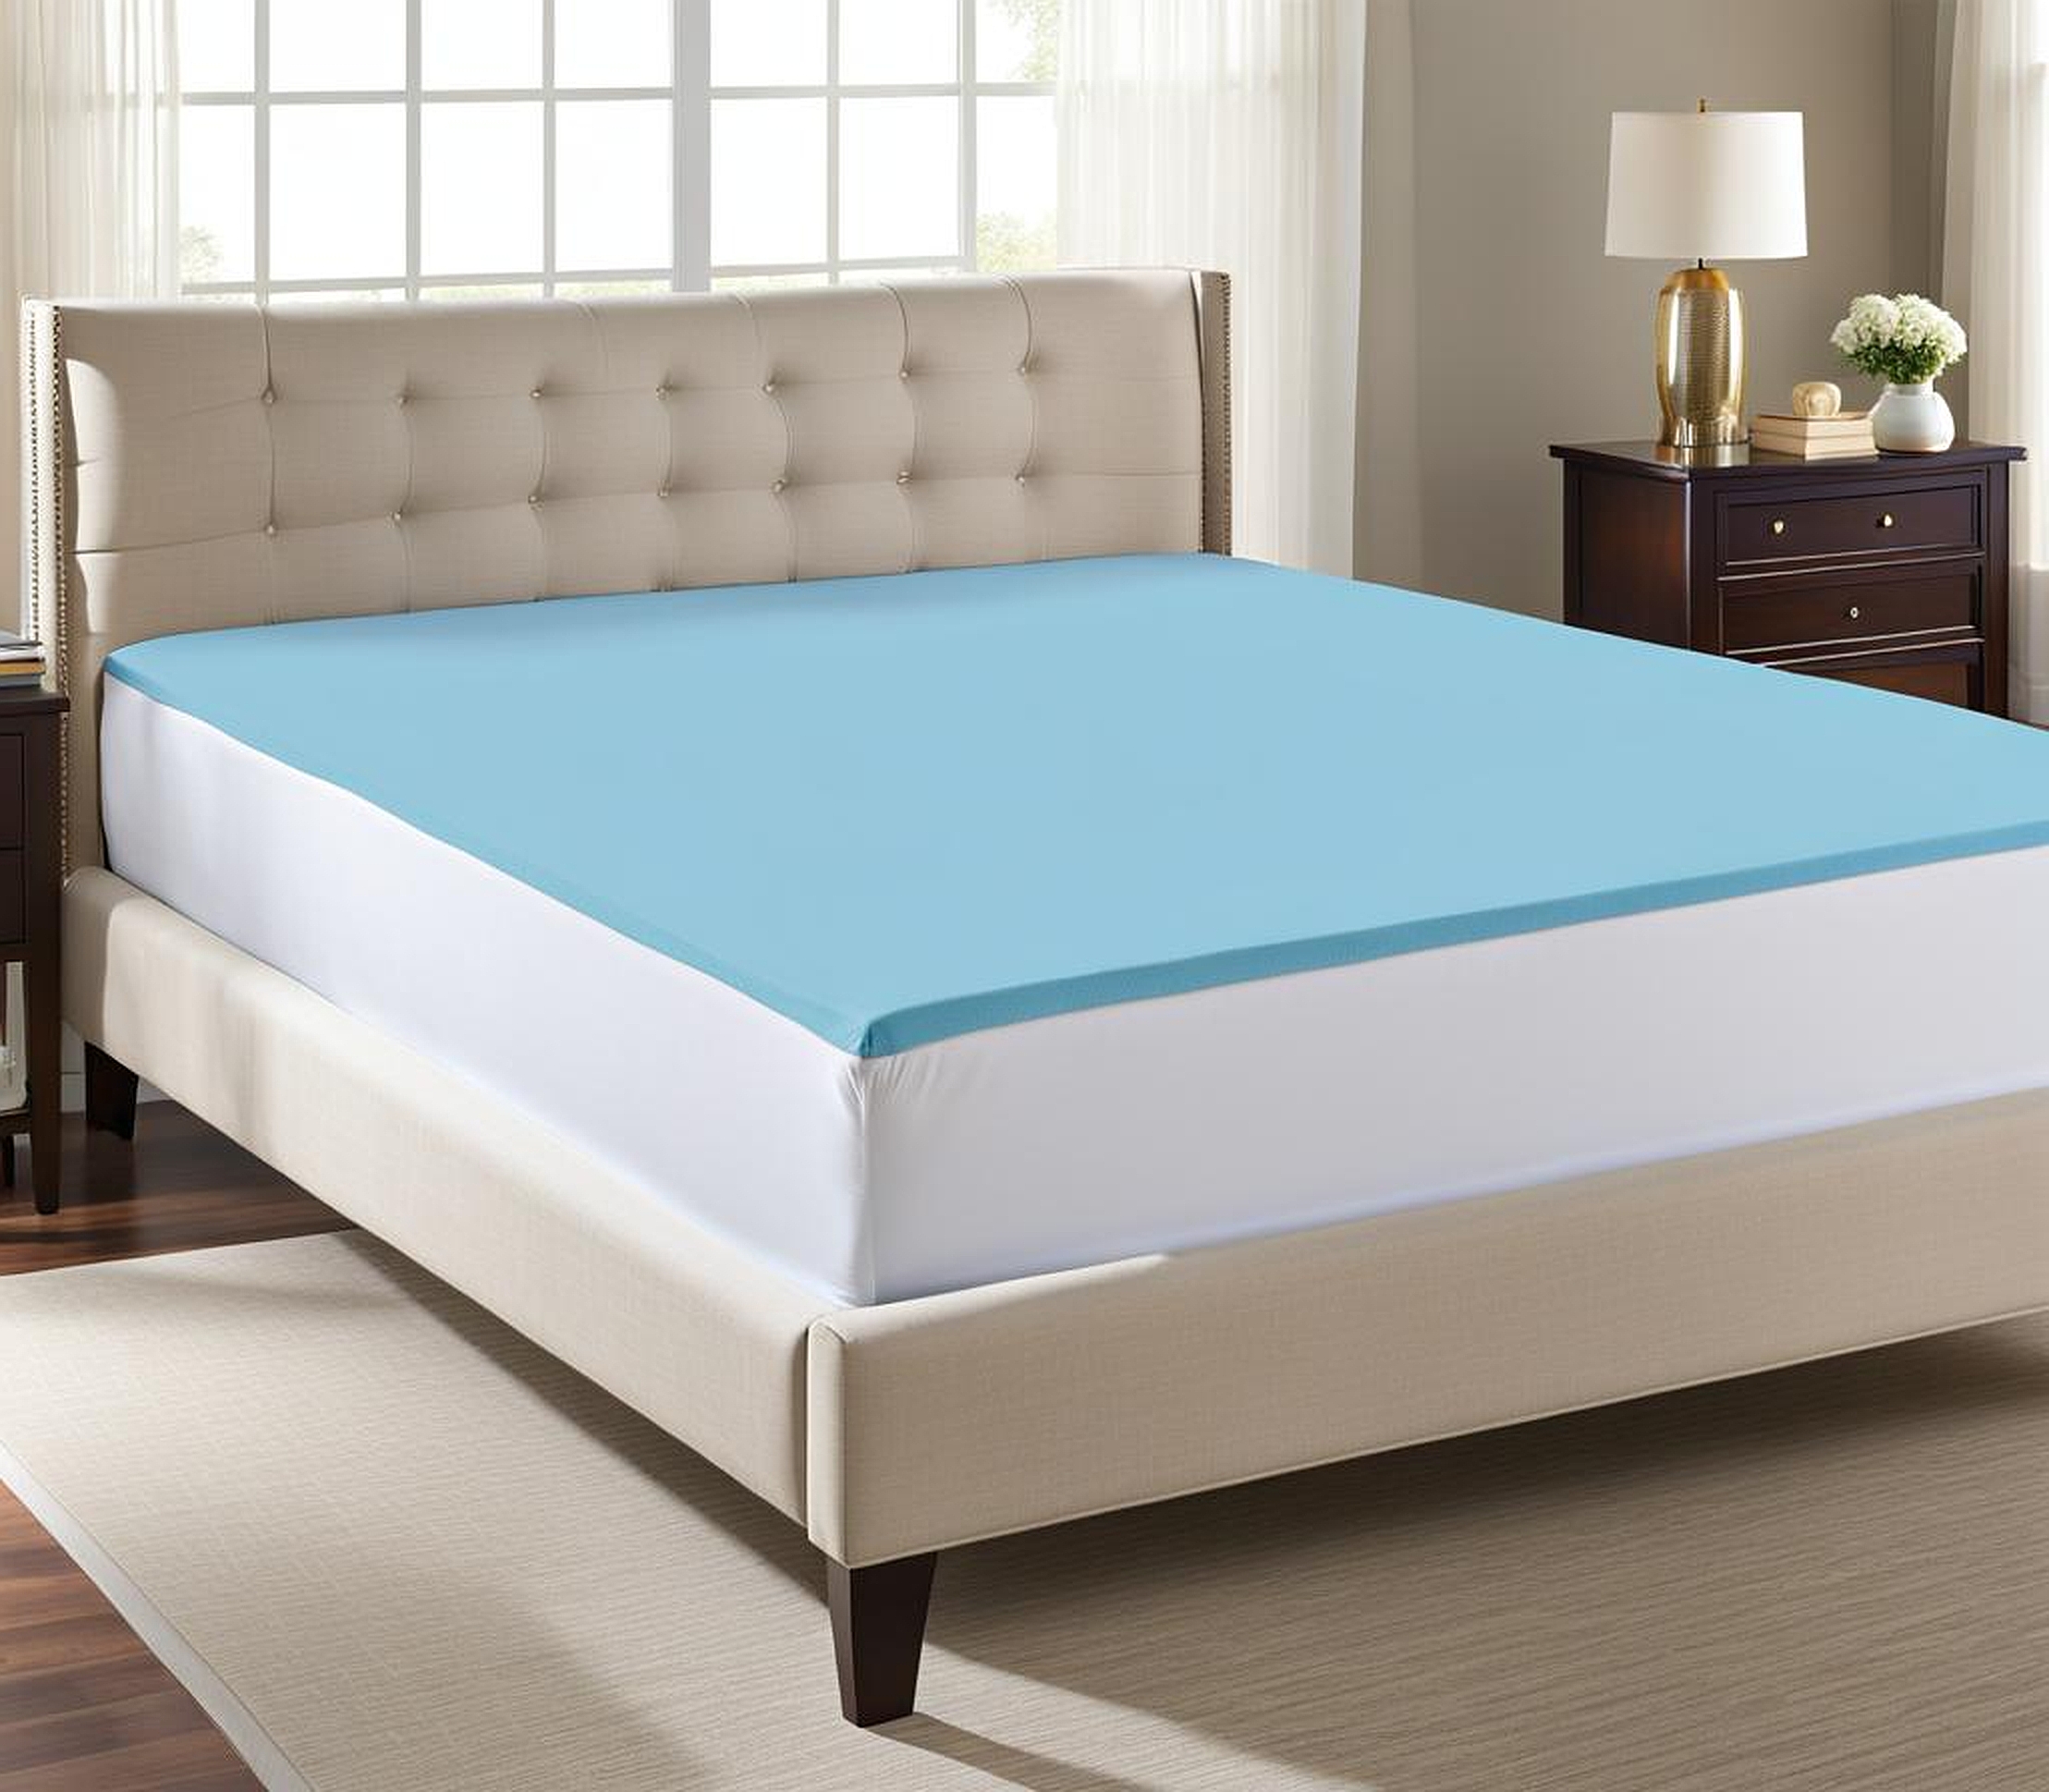 Twin XL Mattress Cover Options for a Fresh New Look